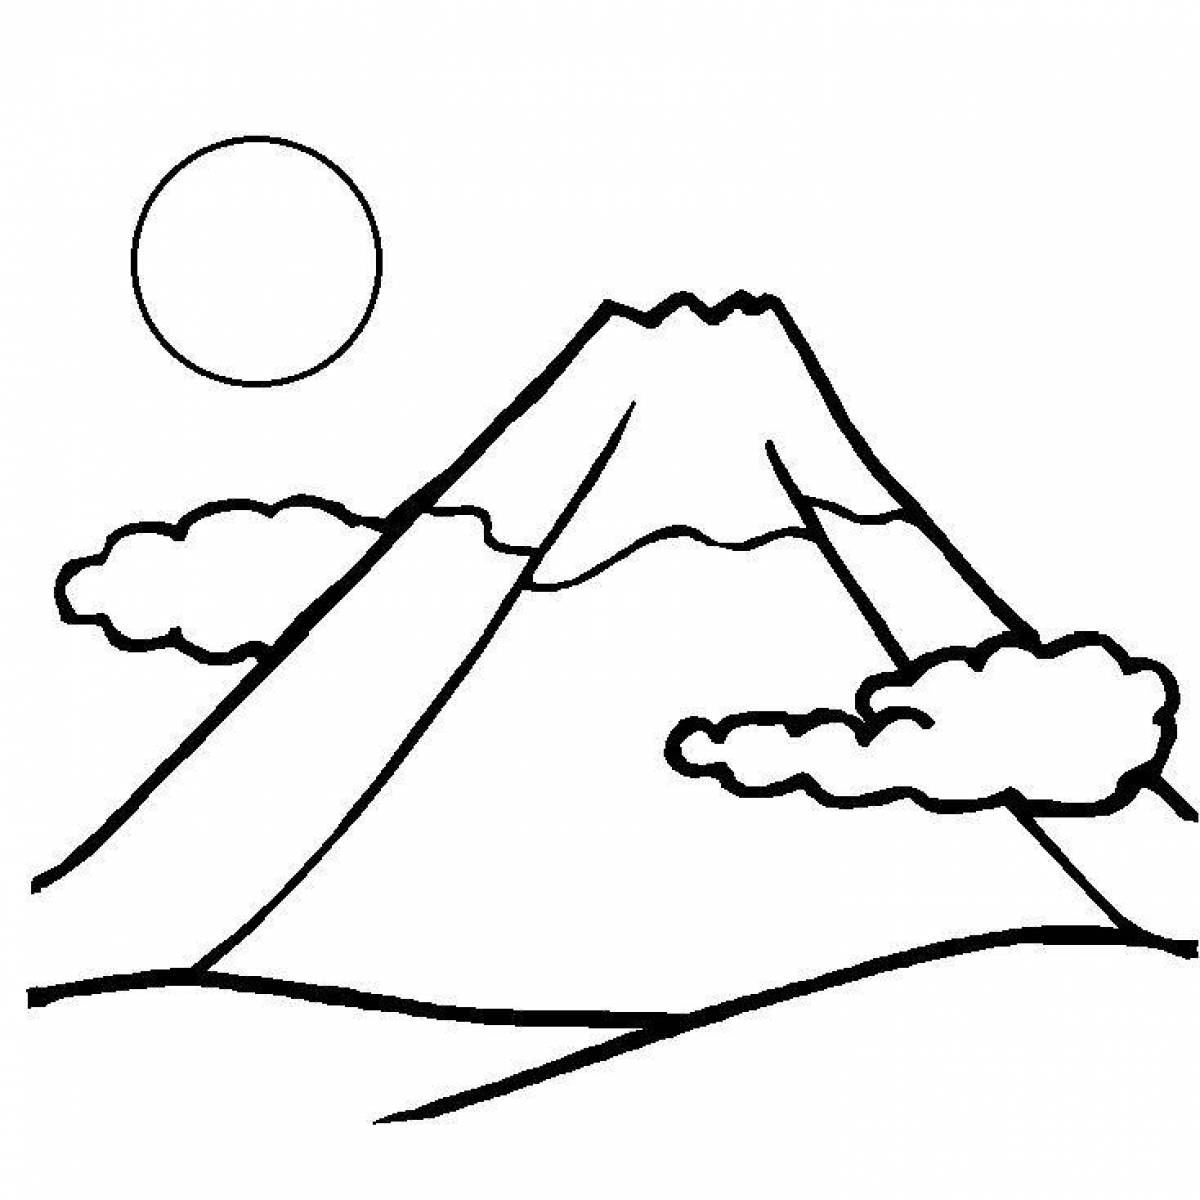 Playful mountain coloring for kids